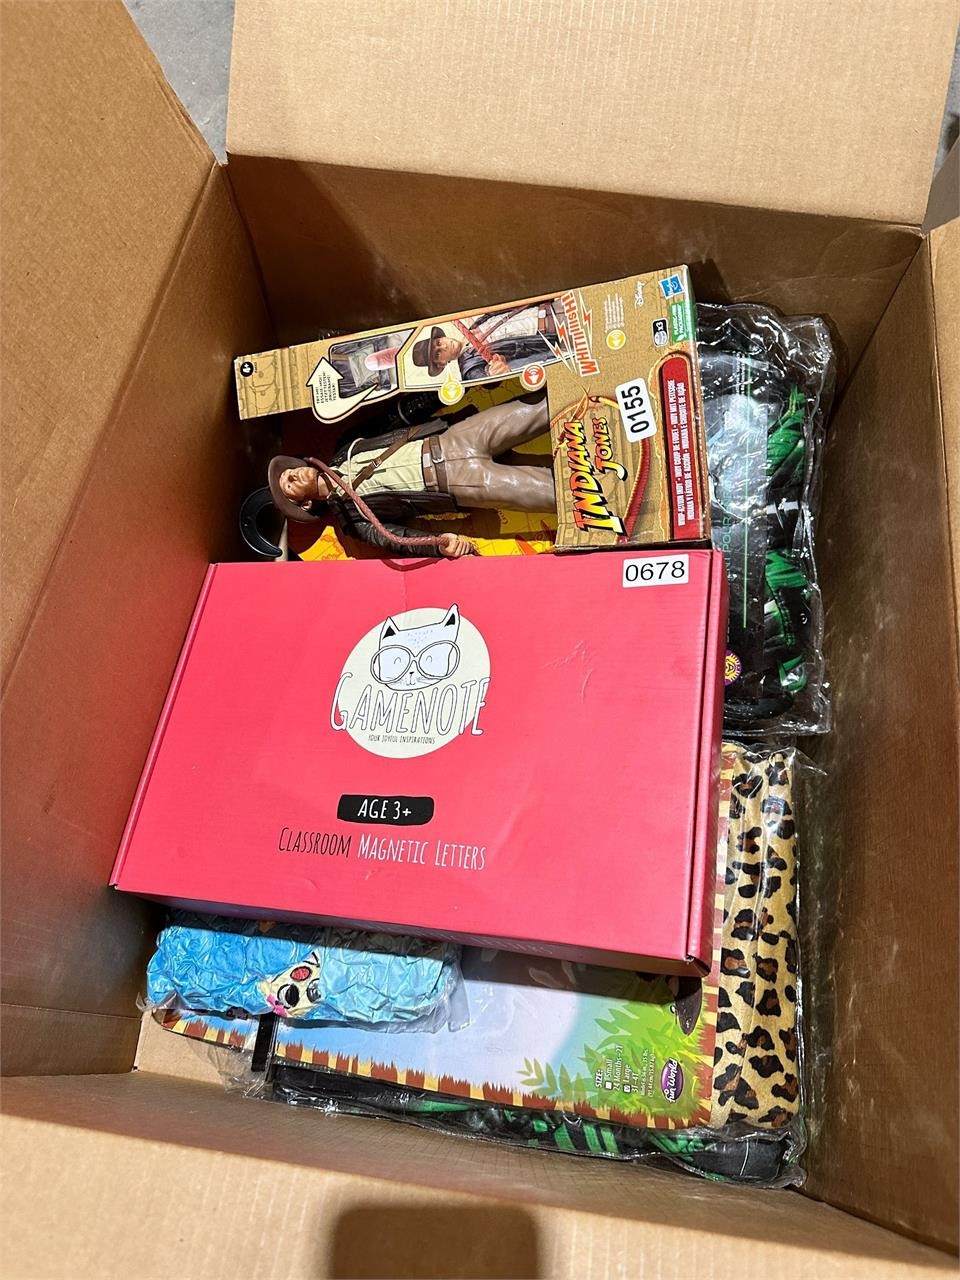 Large box full of new toys & costumes